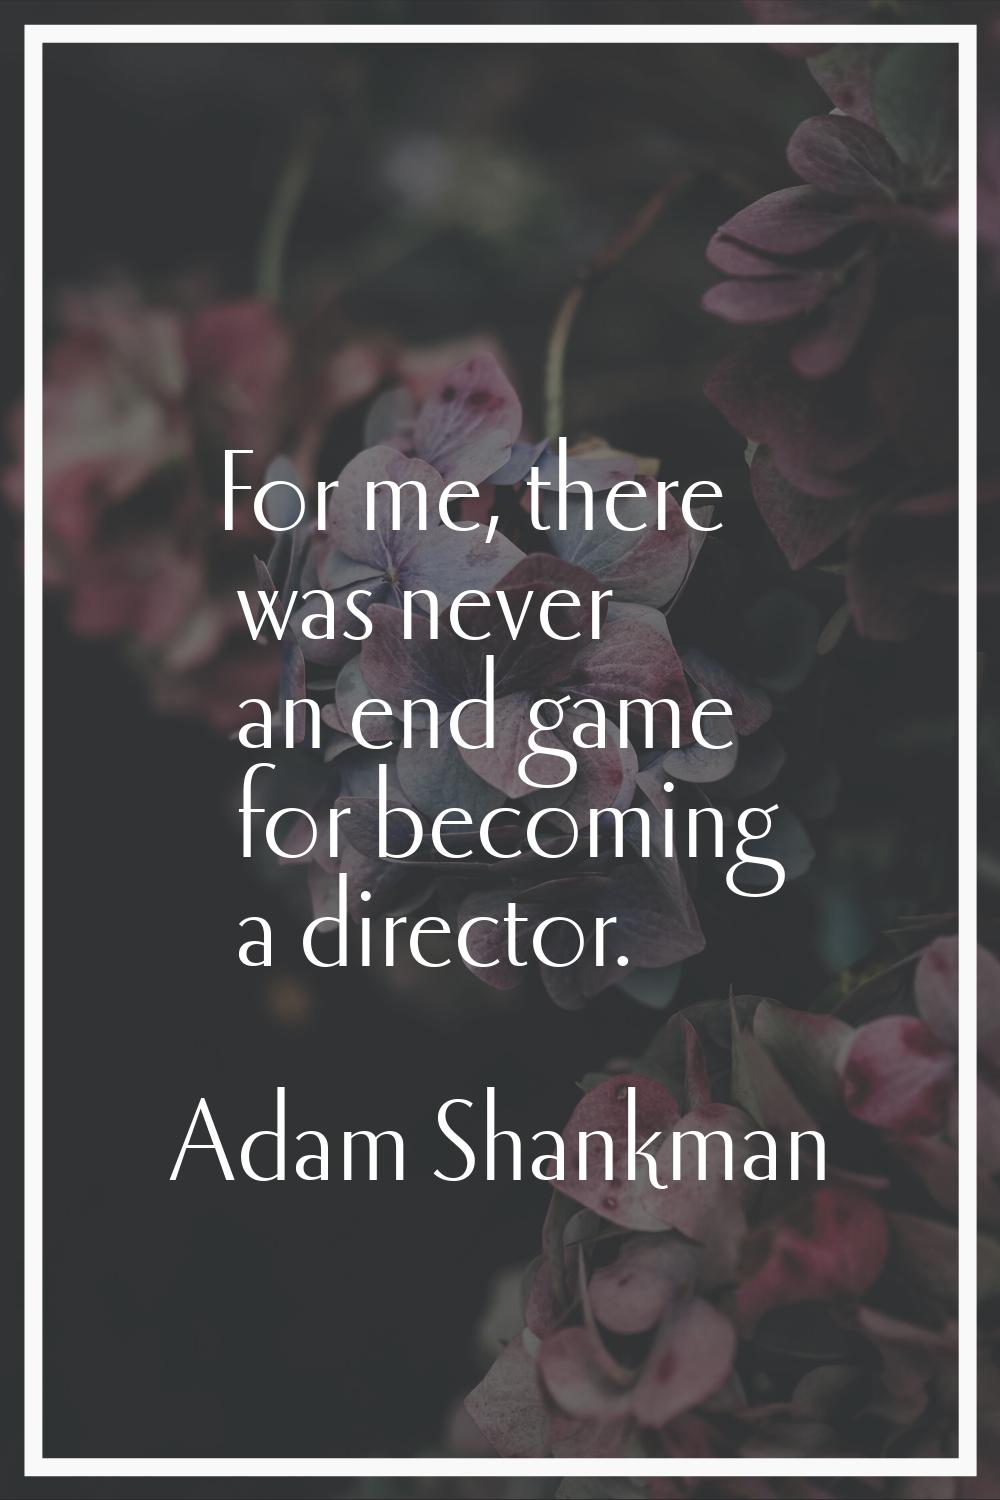 For me, there was never an end game for becoming a director.